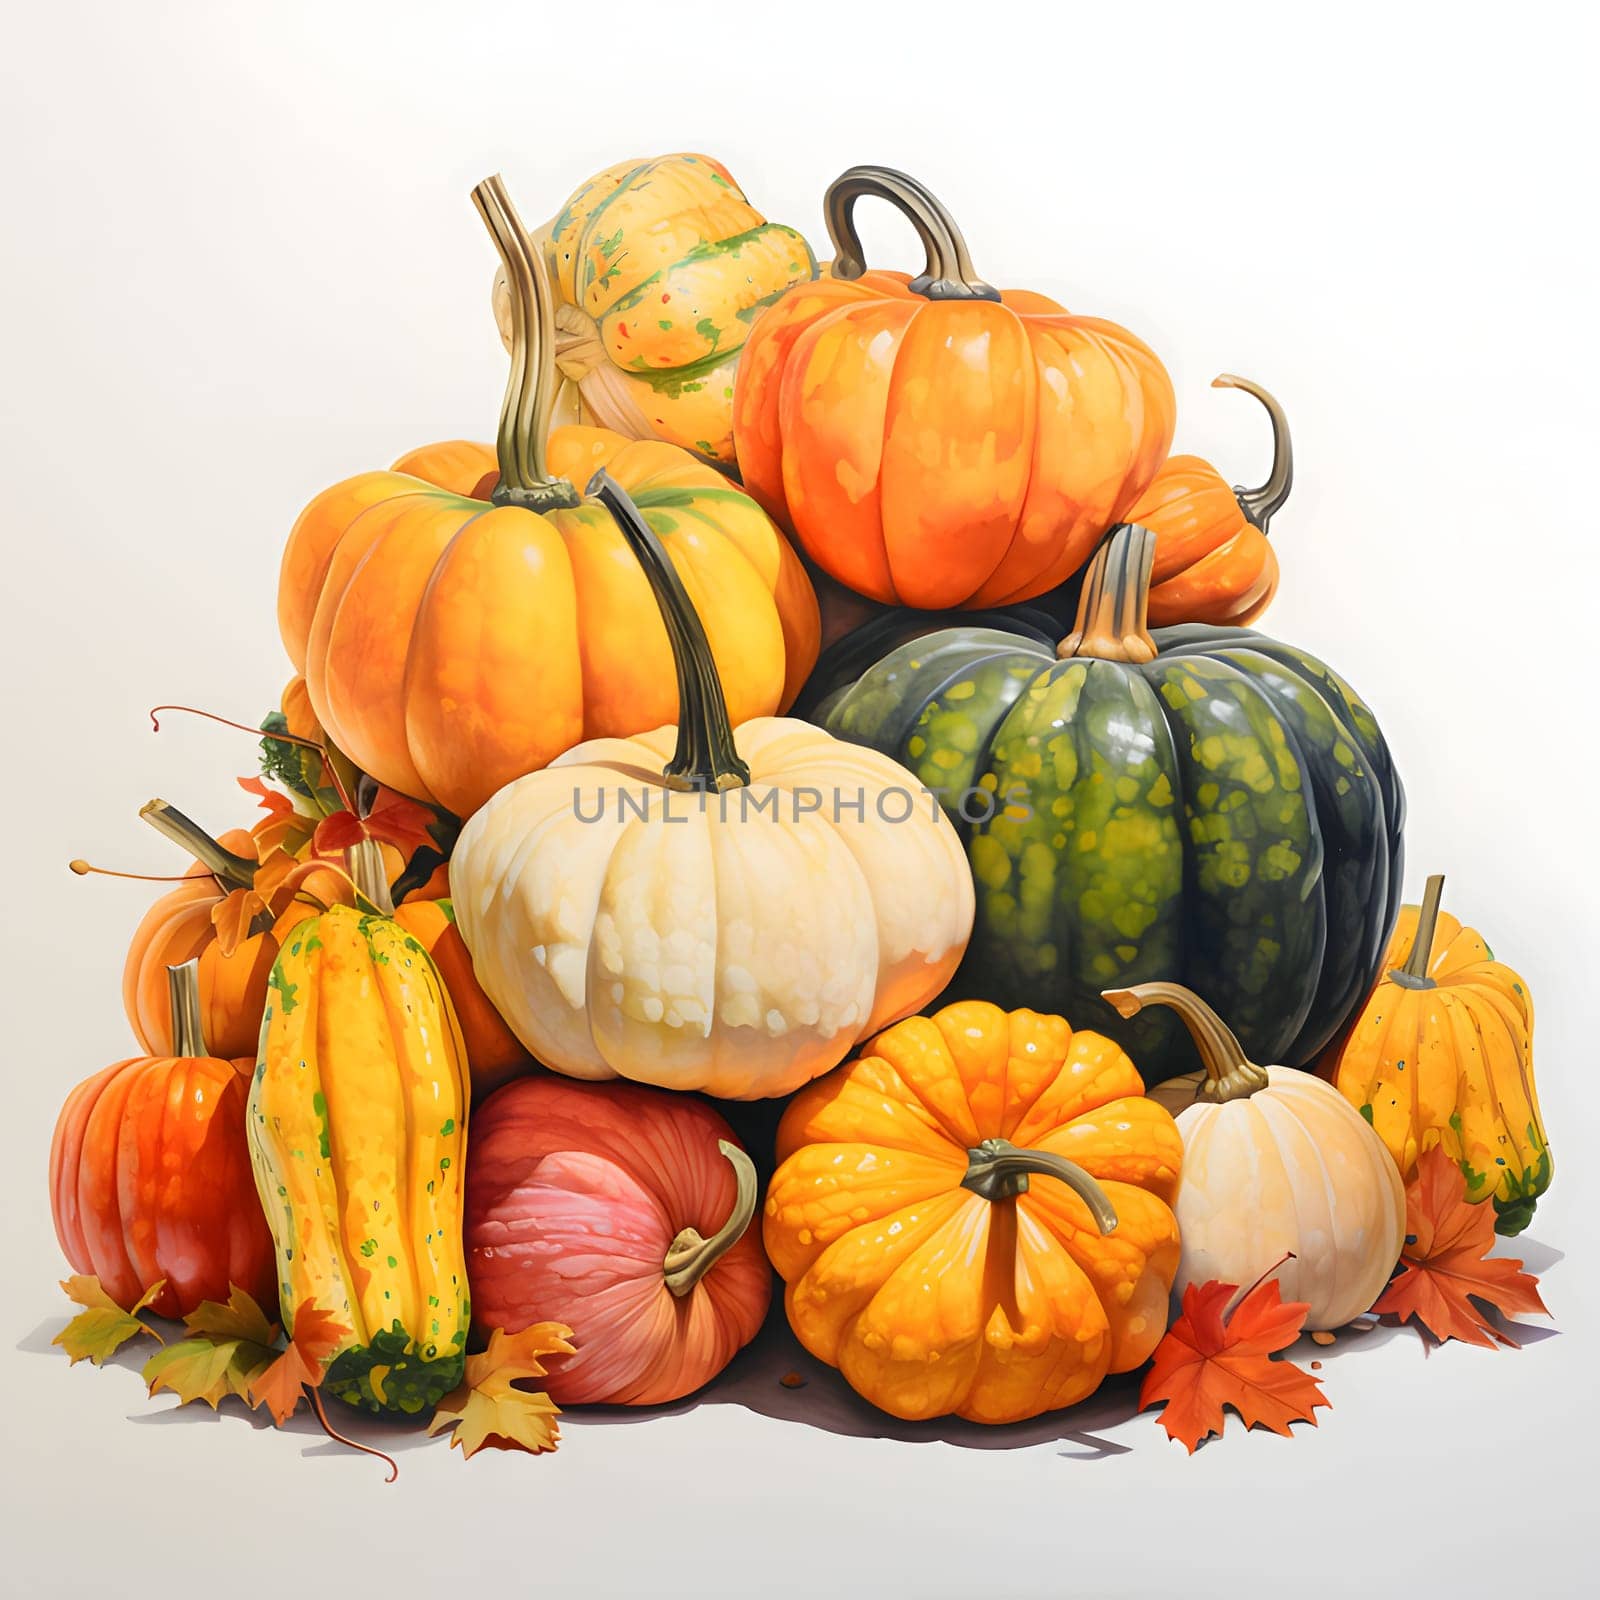 A pile of different color types and shapes of pumpkin. Pumpkin as a dish of thanksgiving for the harvest, picture on a white isolated background. An atmosphere of joy and celebration.